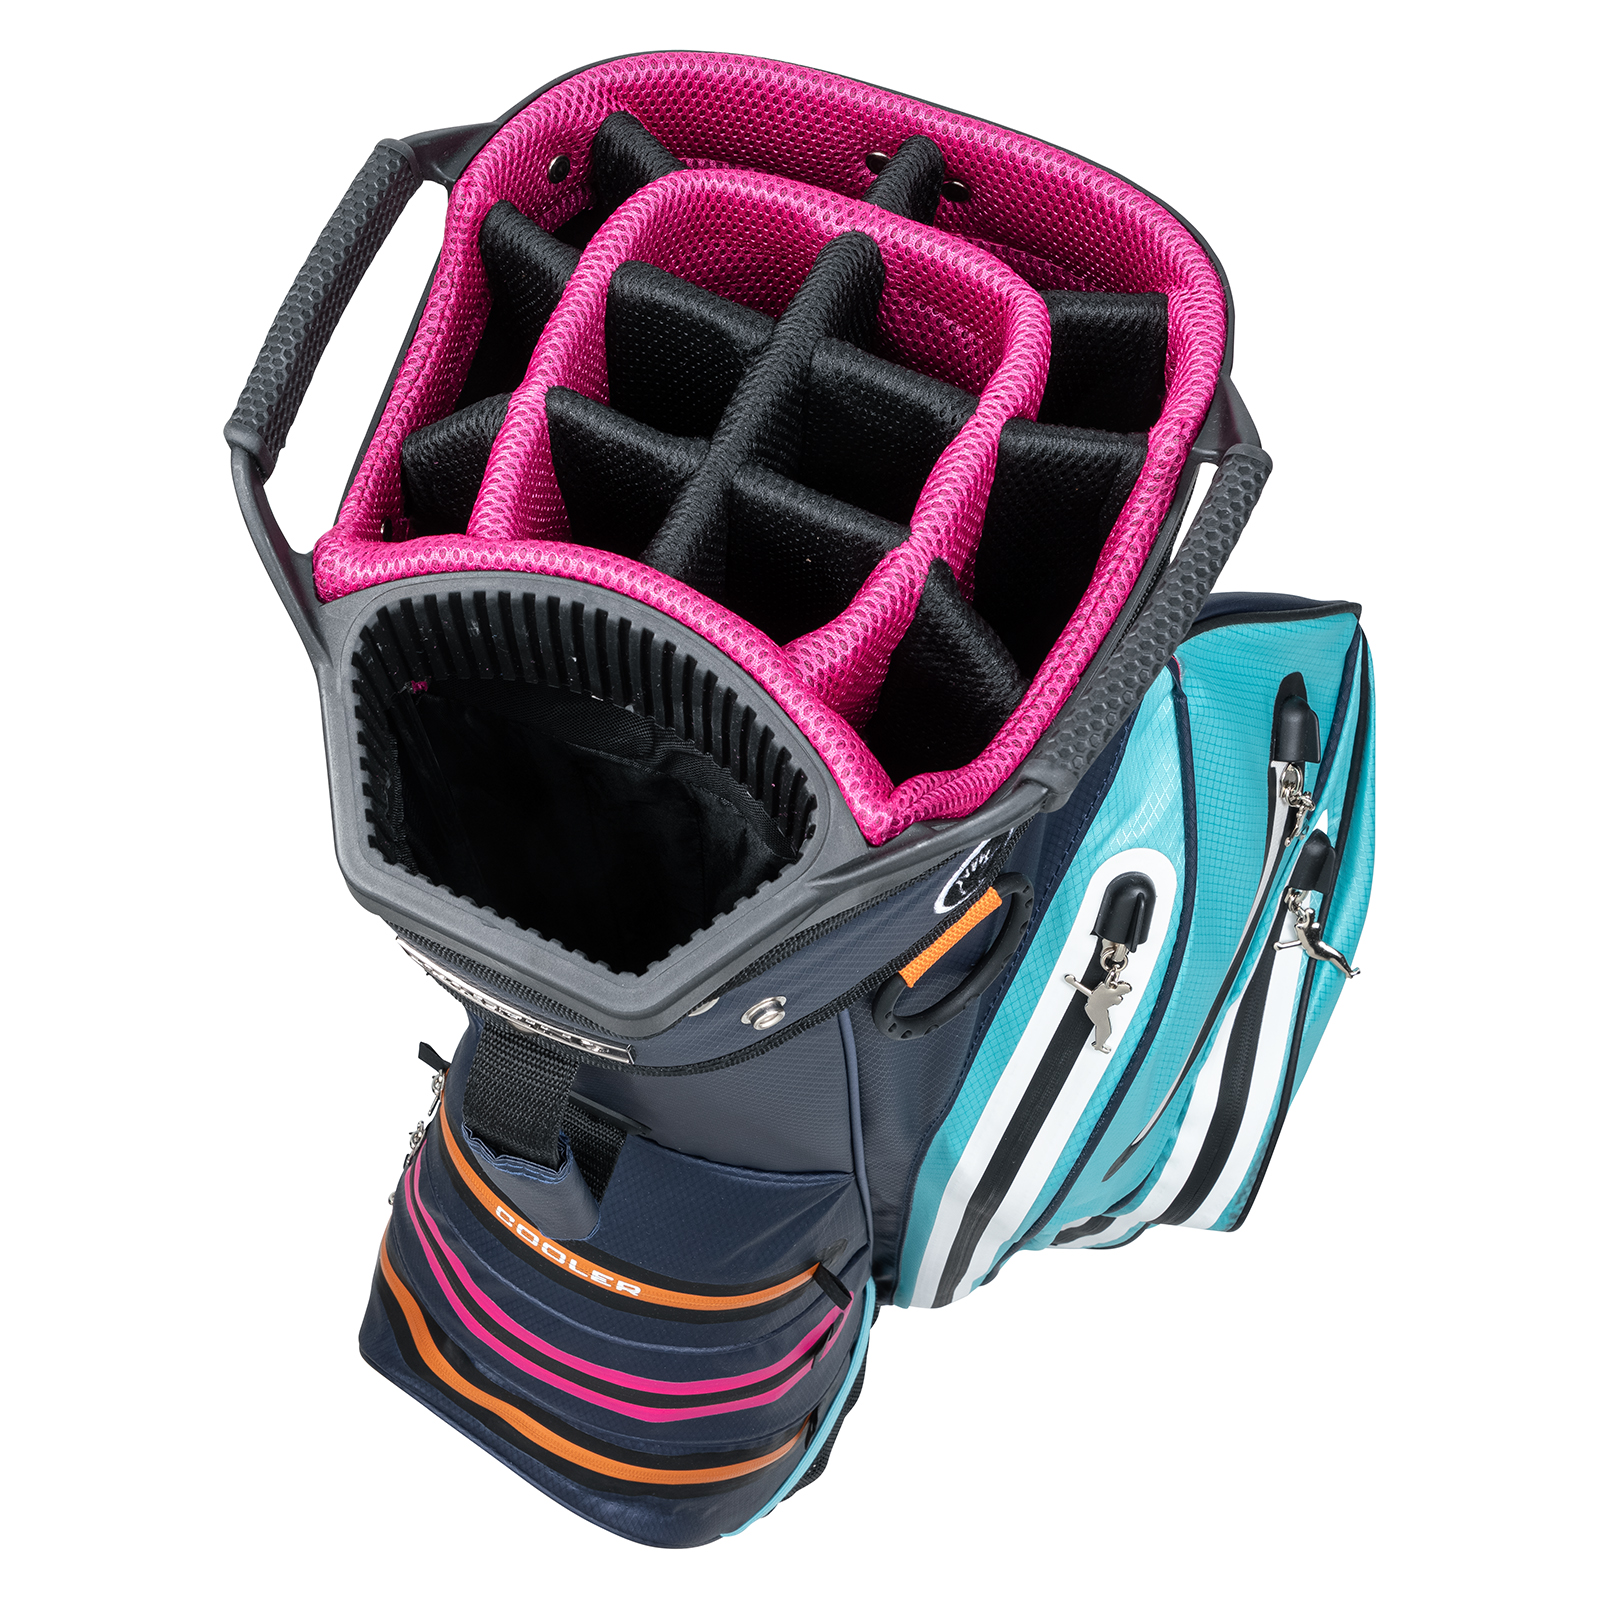 Vielseitiges Golf Cartbag in Multicolor